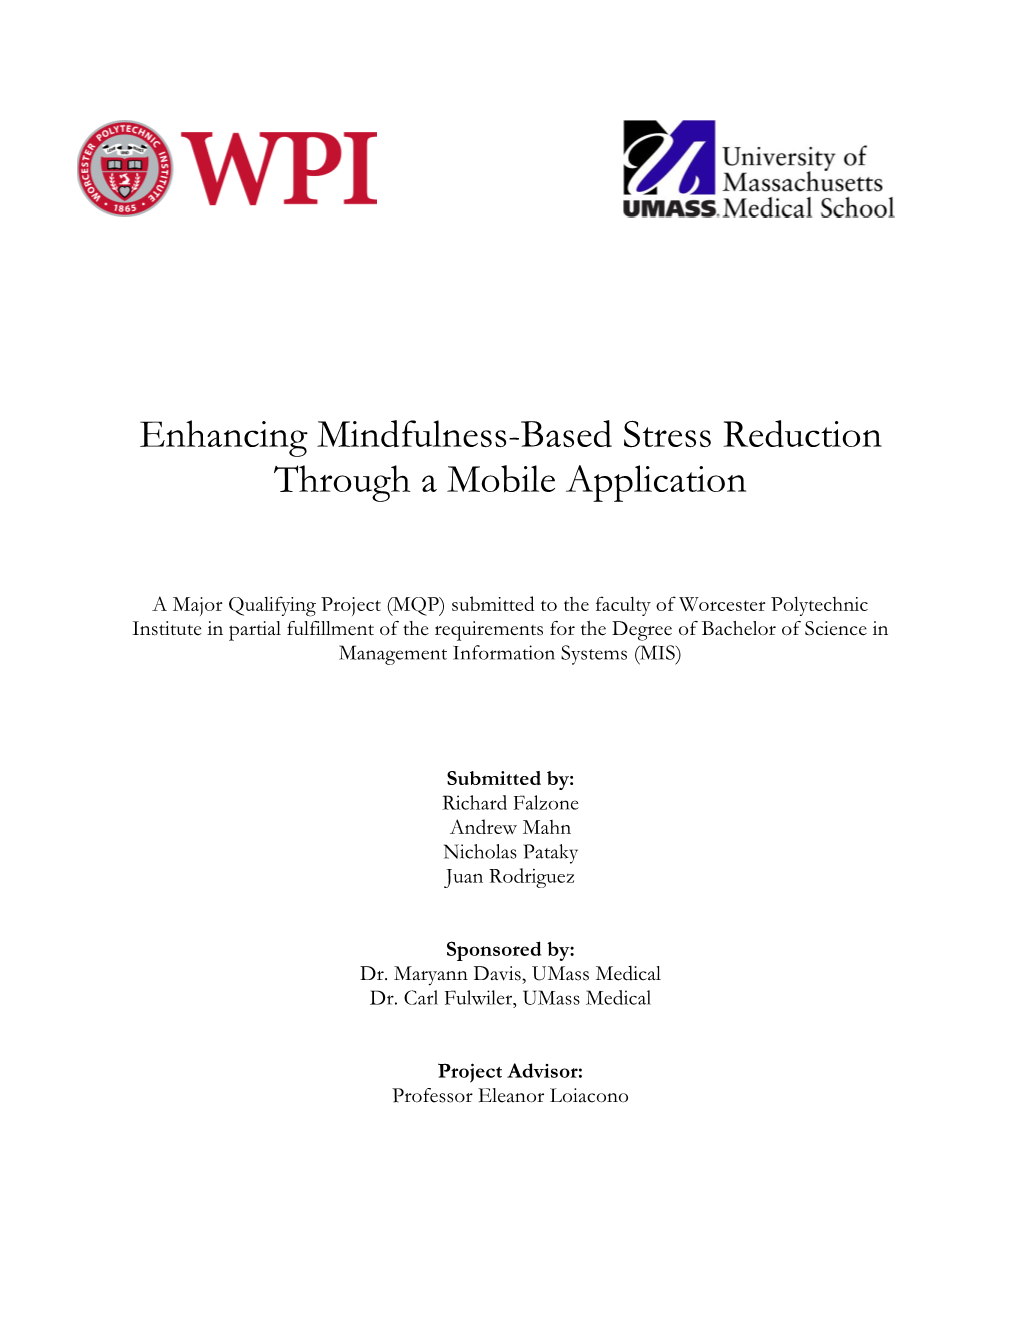 Enhancing Mindfulness-Based Stress Reduction Through a Mobile Application